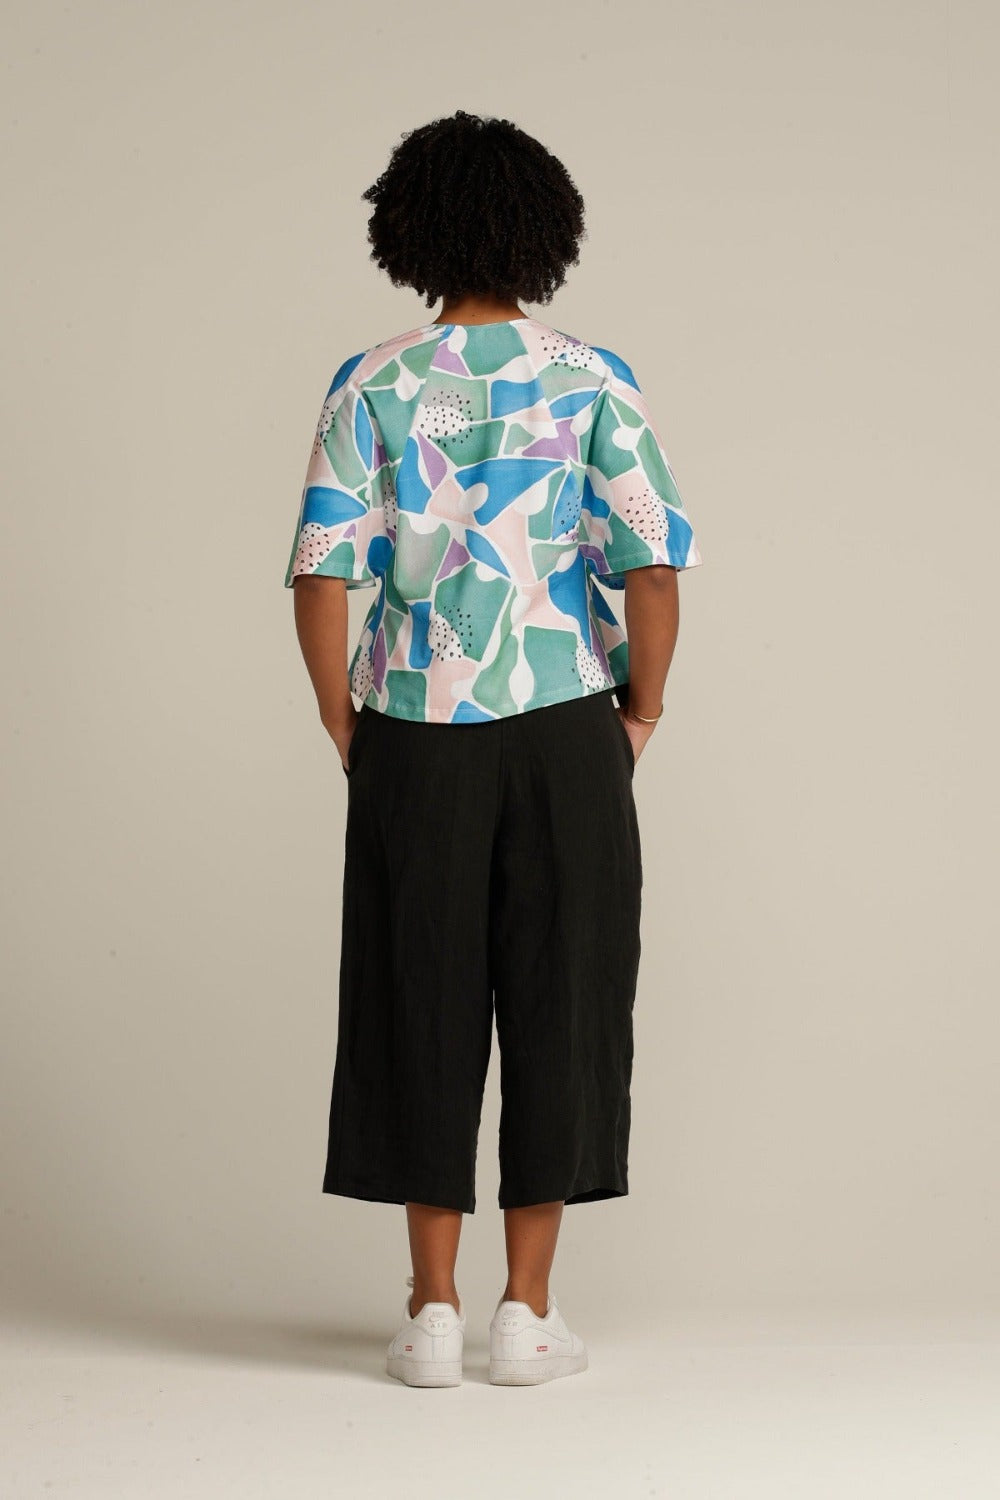 Back view curly haired woman in printed adaptive top 